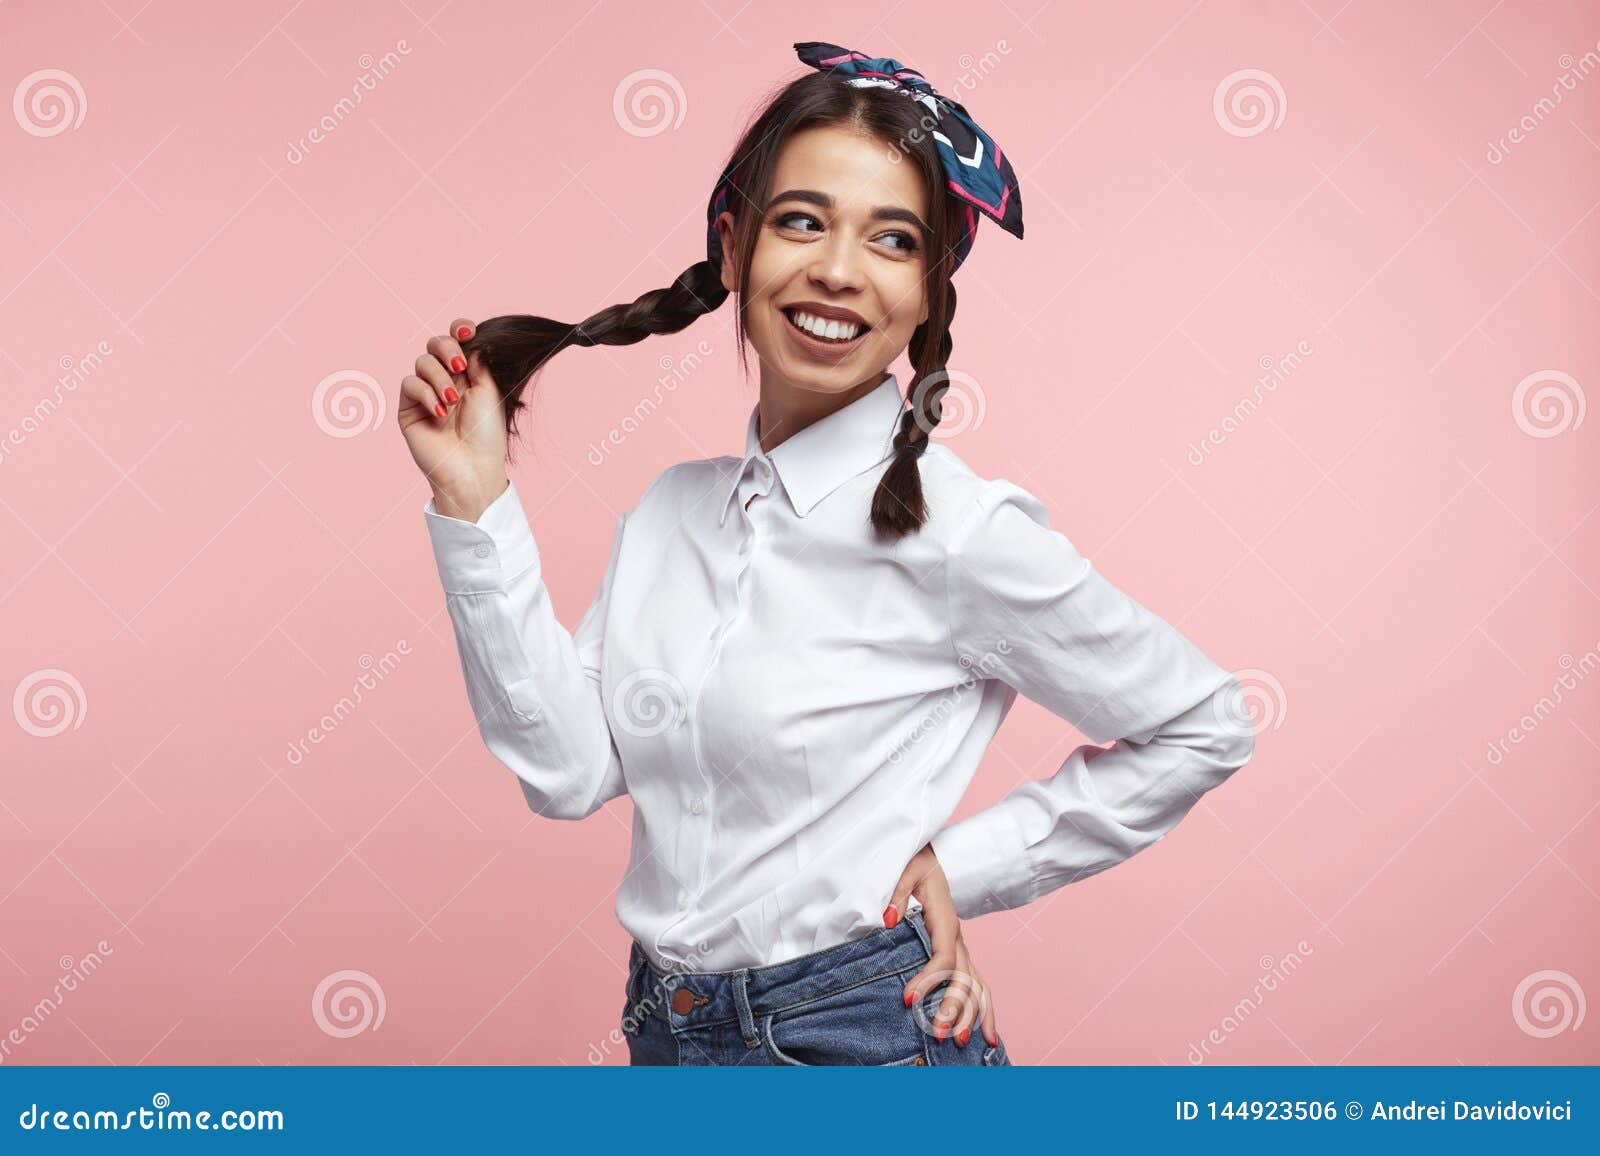 Cheerful Latina Female With Bright Smile Wearing Whit